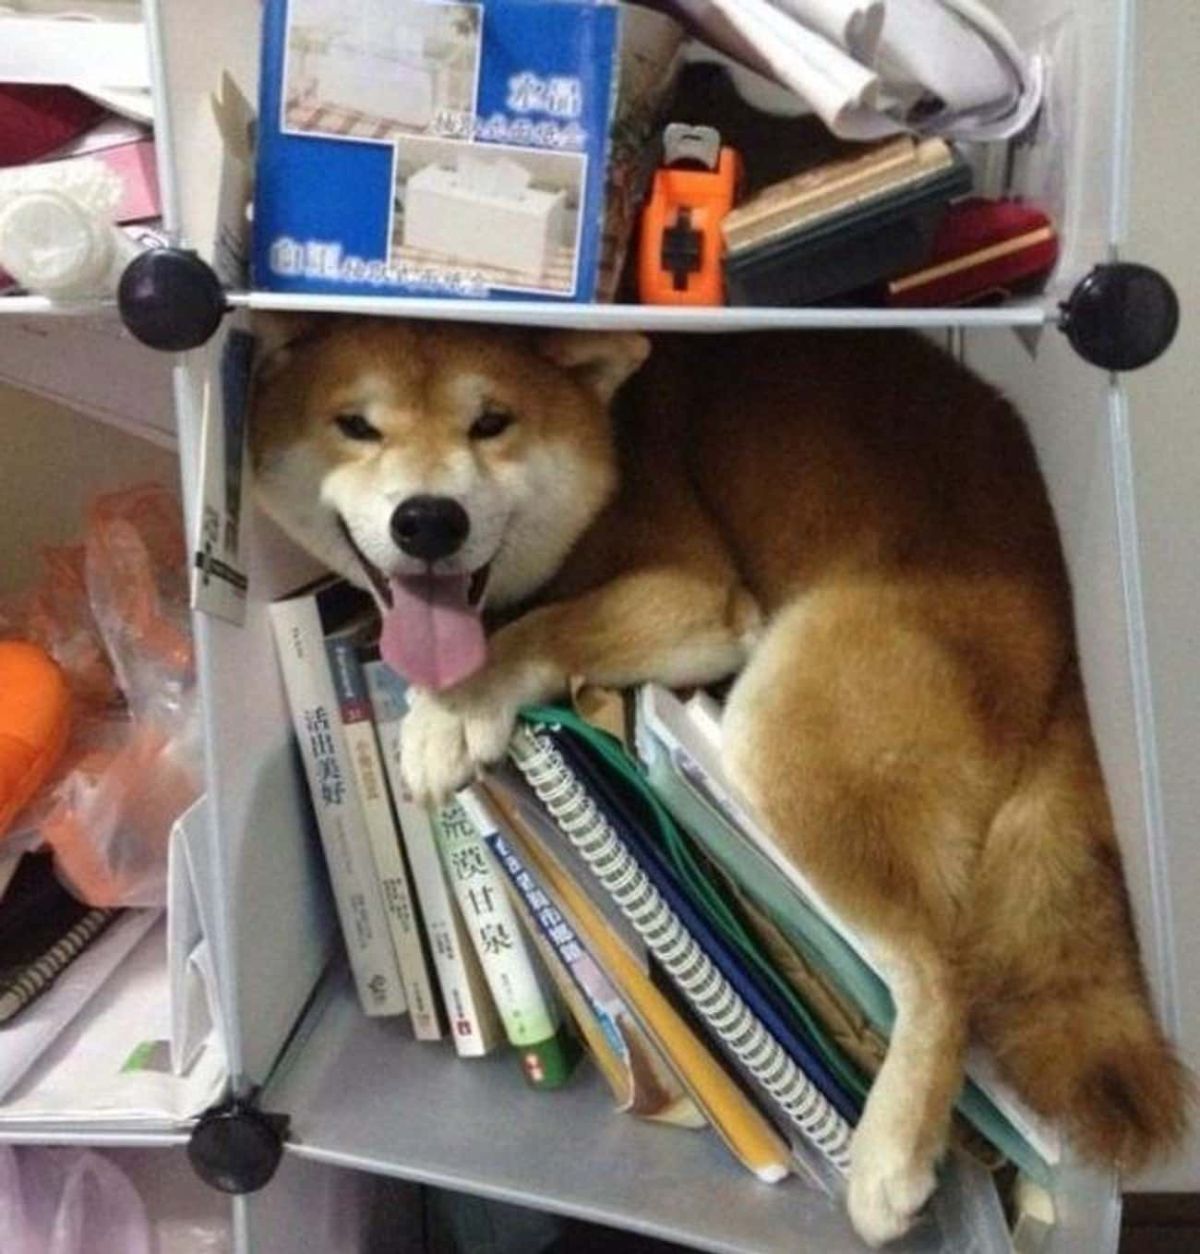 brown and white shiba inu perched on a stack of books inside a small white shelf